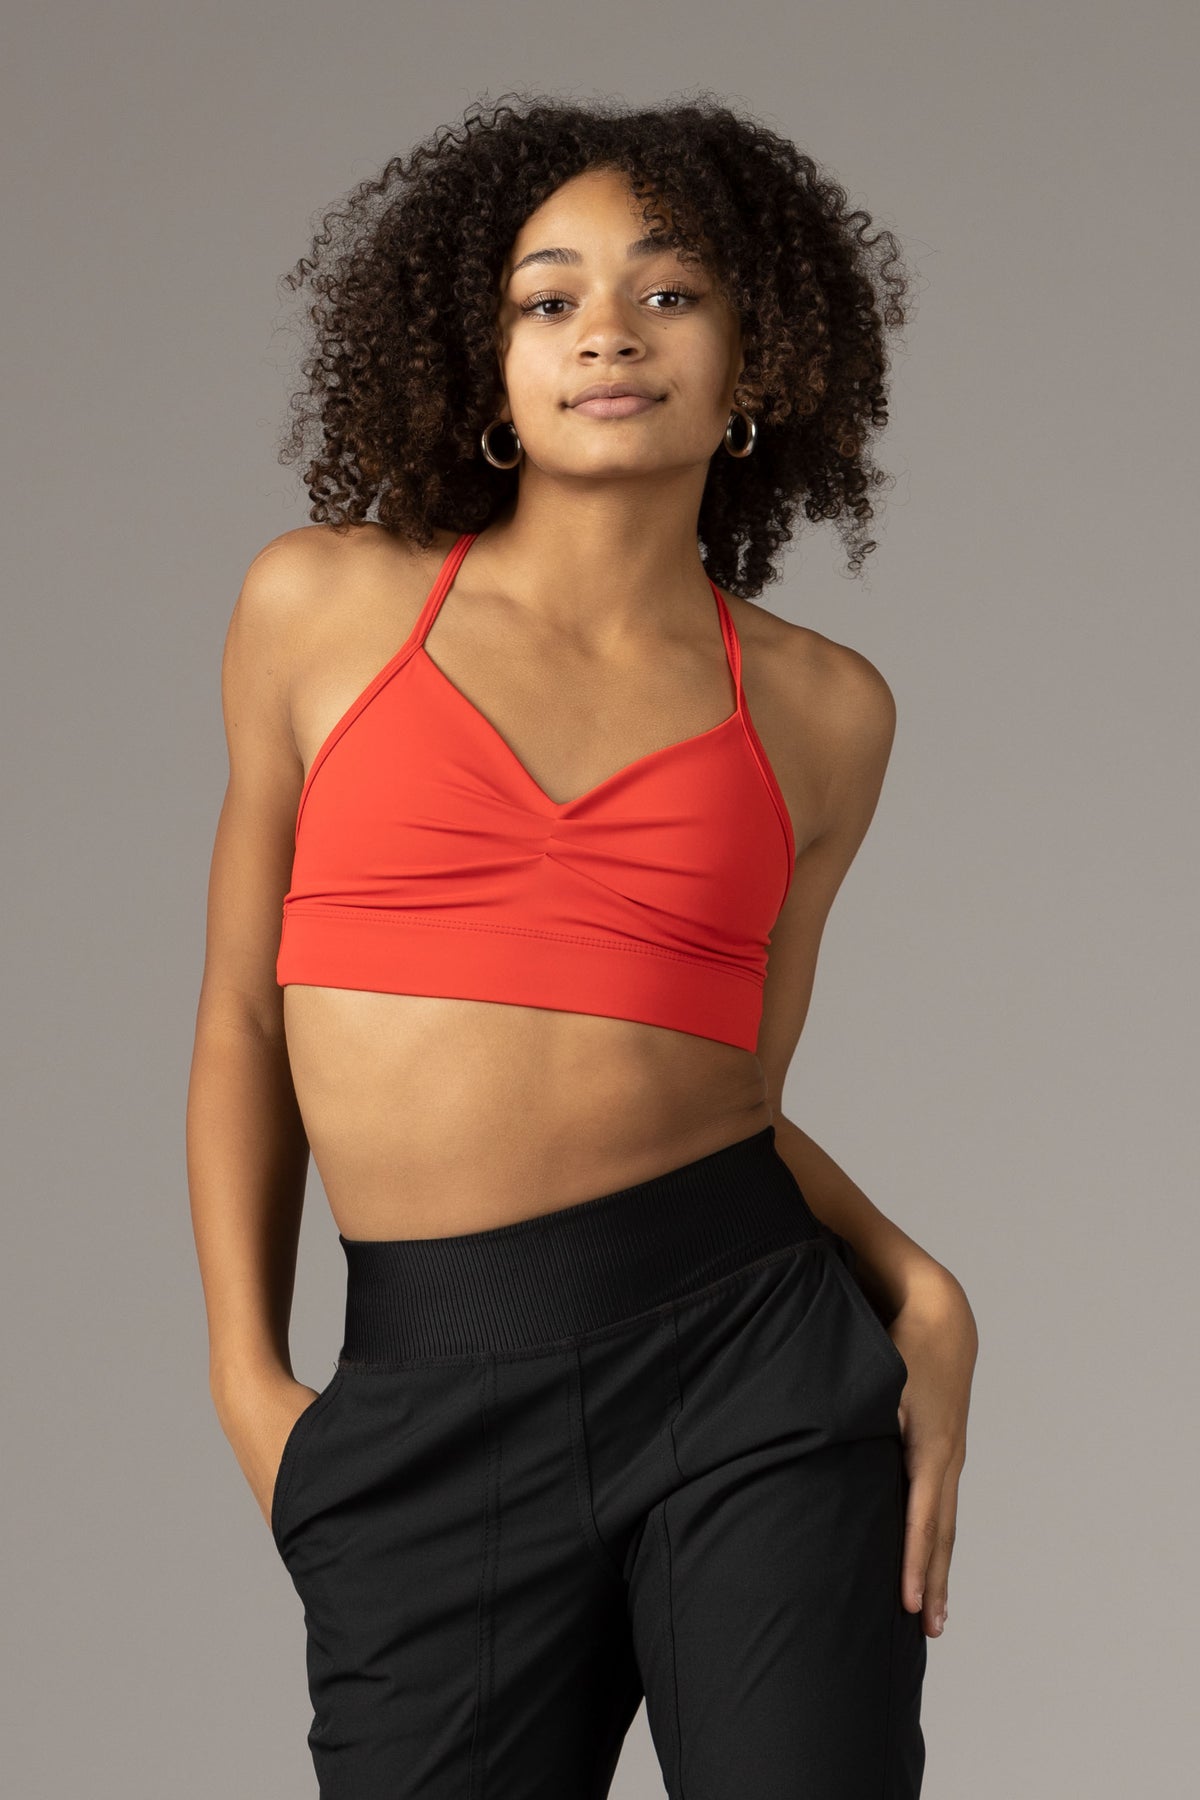 You Can Dance, Shimmy And Shake In This $35 Strapless Bra And It Won't  Slide Down - SHEfinds